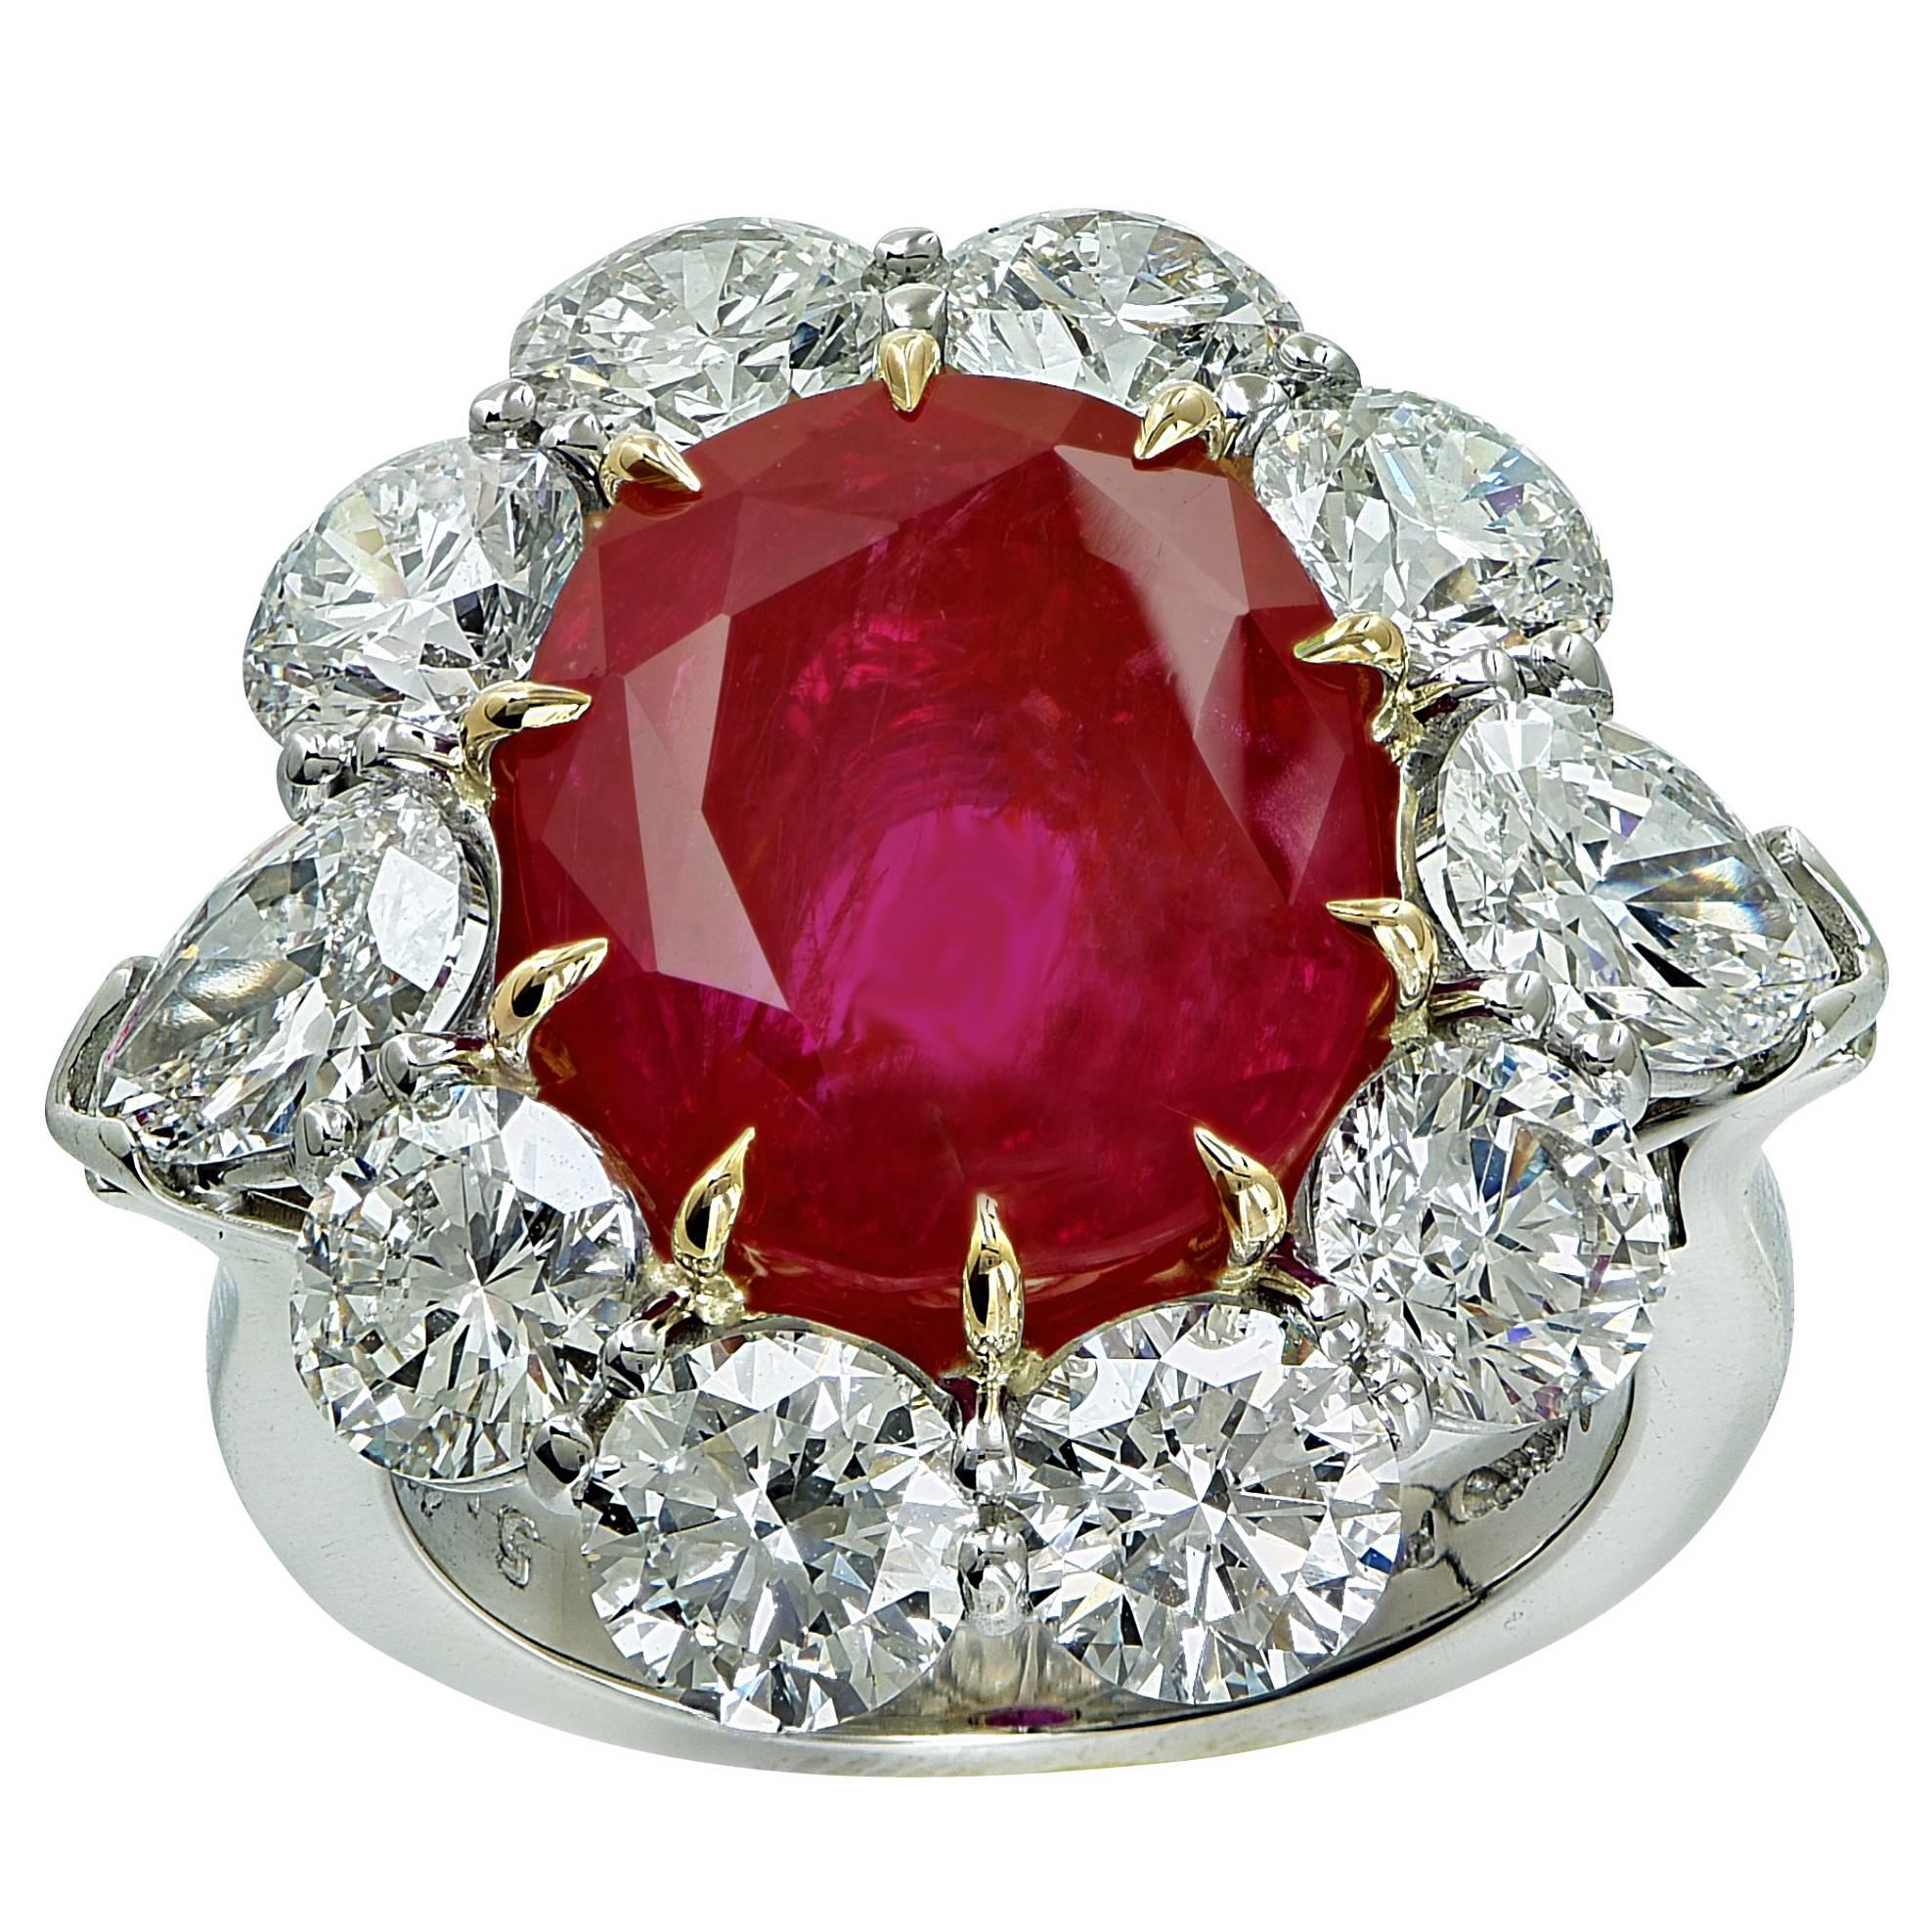 8.66ct Unheated Burma Ruby with AGL report surrounded by 8 GIA graded round brilliant cut and 2 GIA graded pear brilliant cut diamonds with a total weighing of 5.42cts, D-F color, VS1-SI1 clarity, set in to a platinum hand made ring. Signed A.